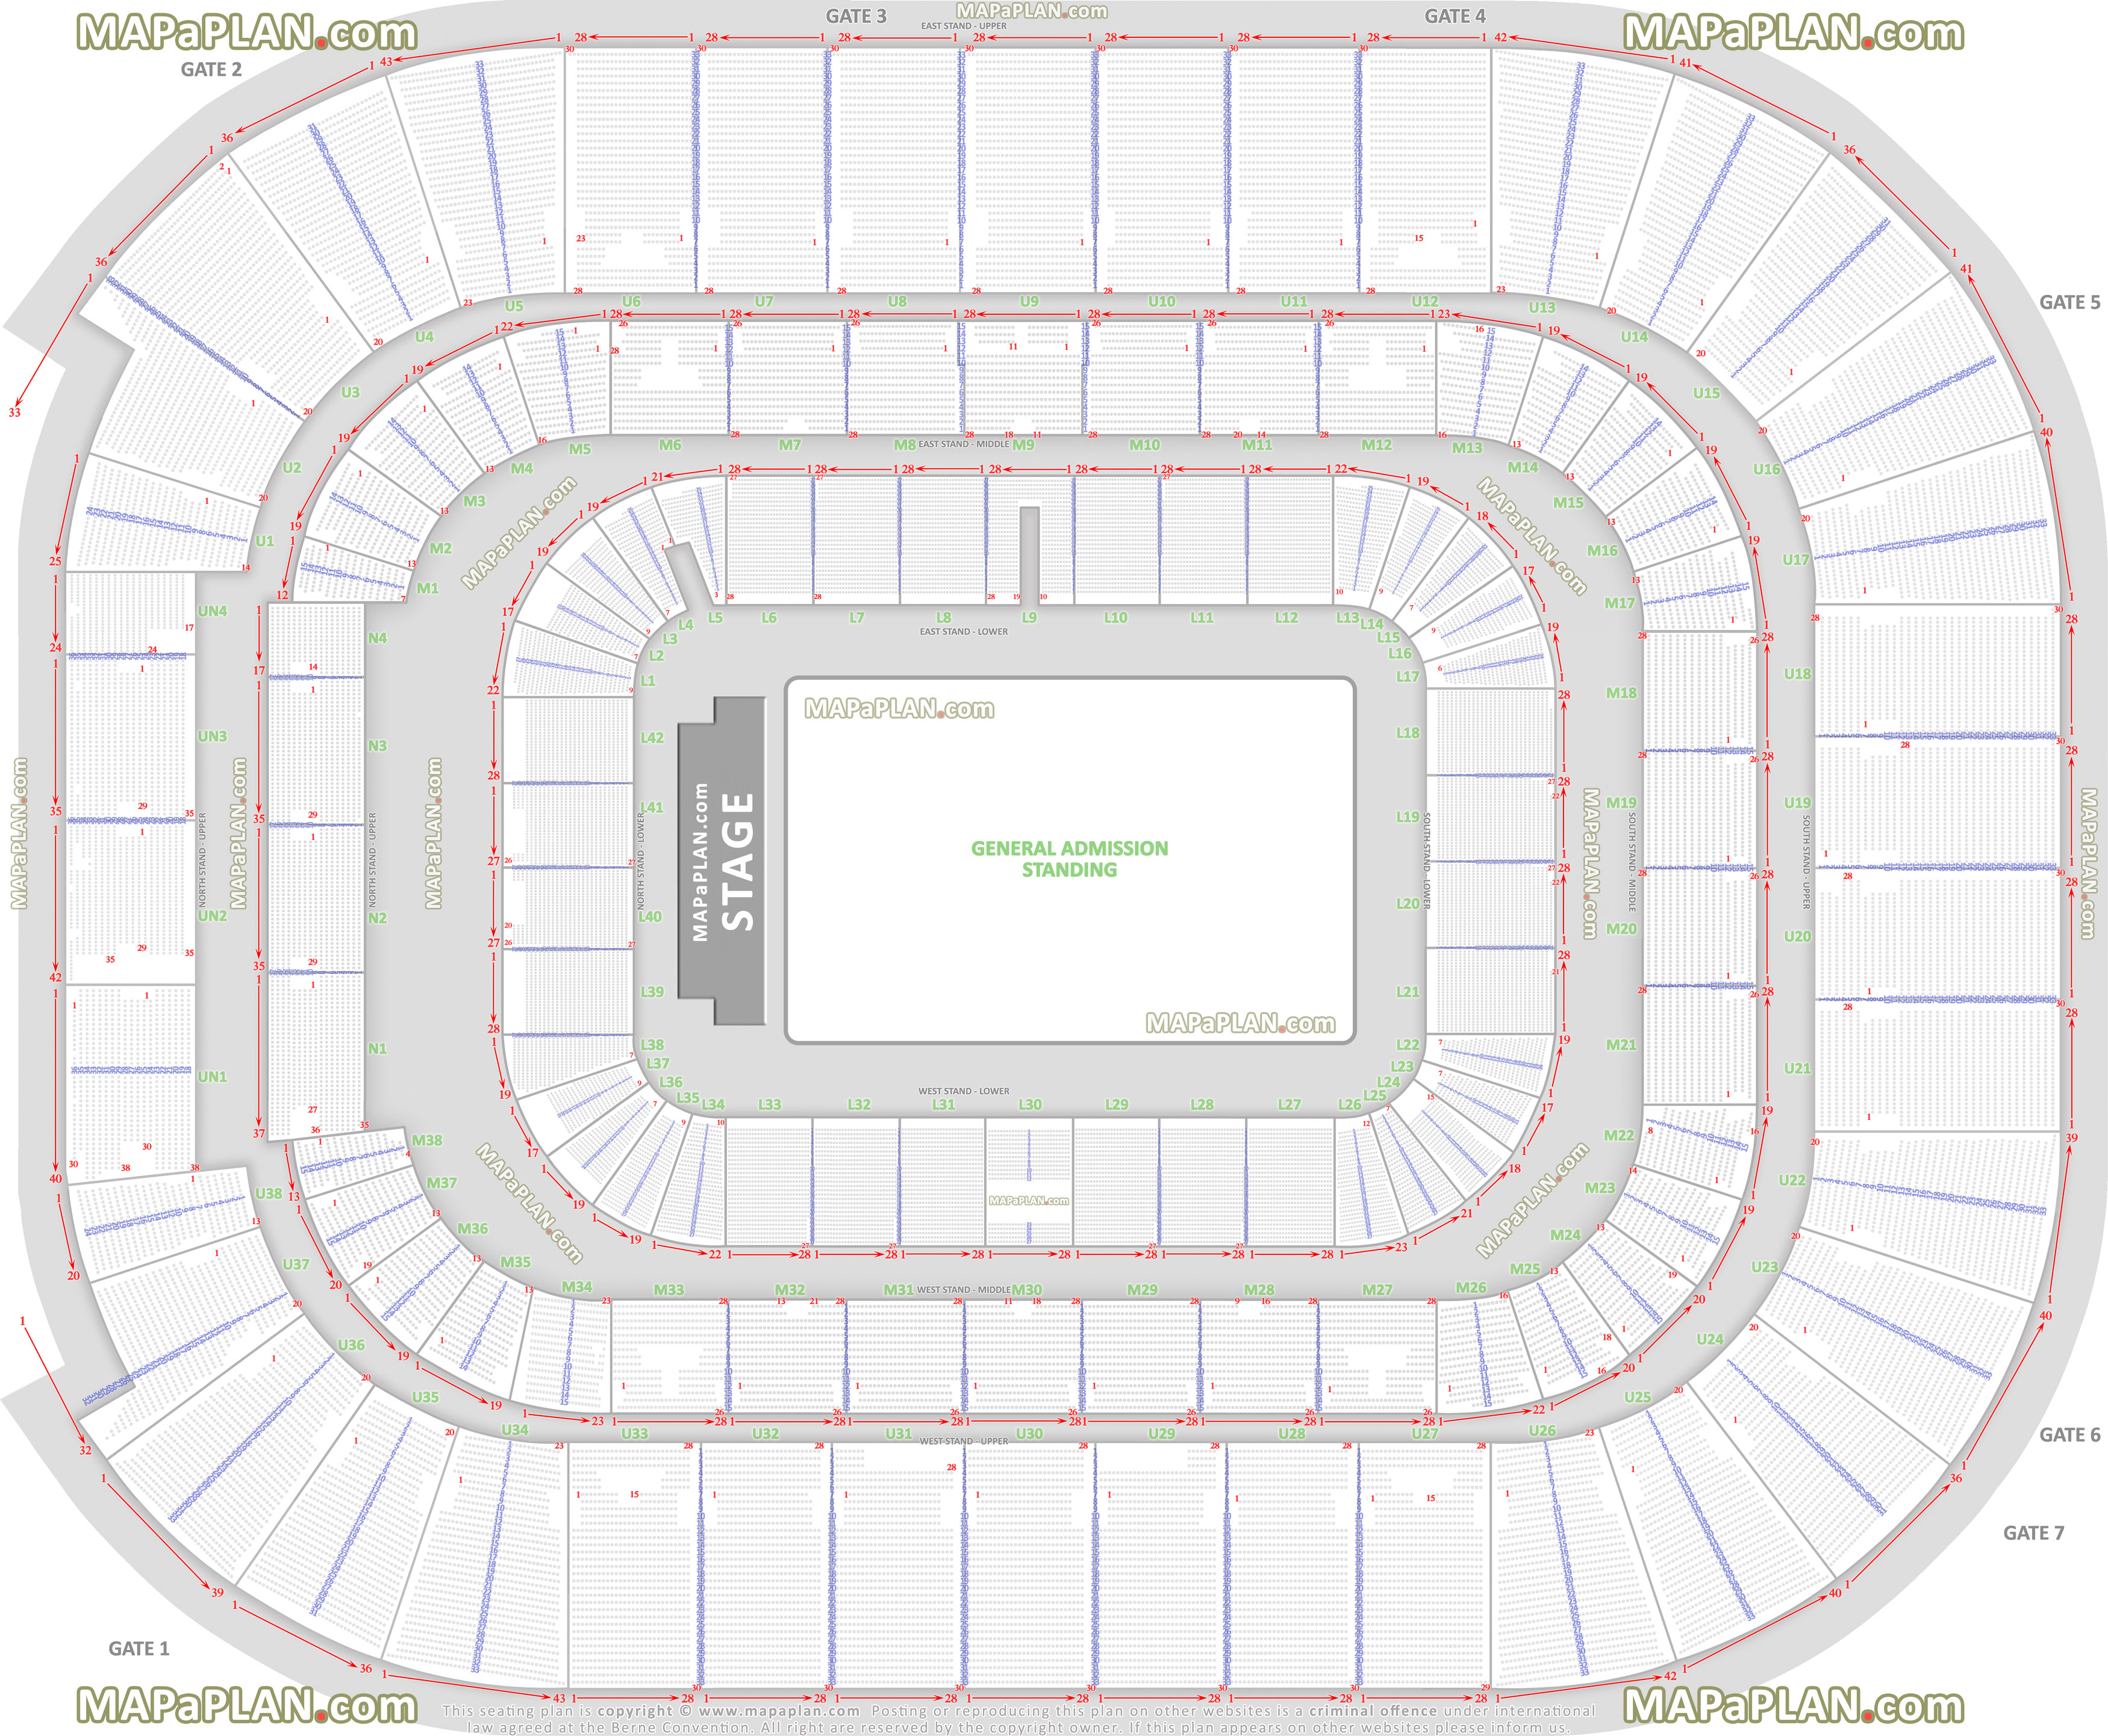 detailed seat row number concert chart general admission standing north east south west stand Cardiff Millennium Stadium seating plan